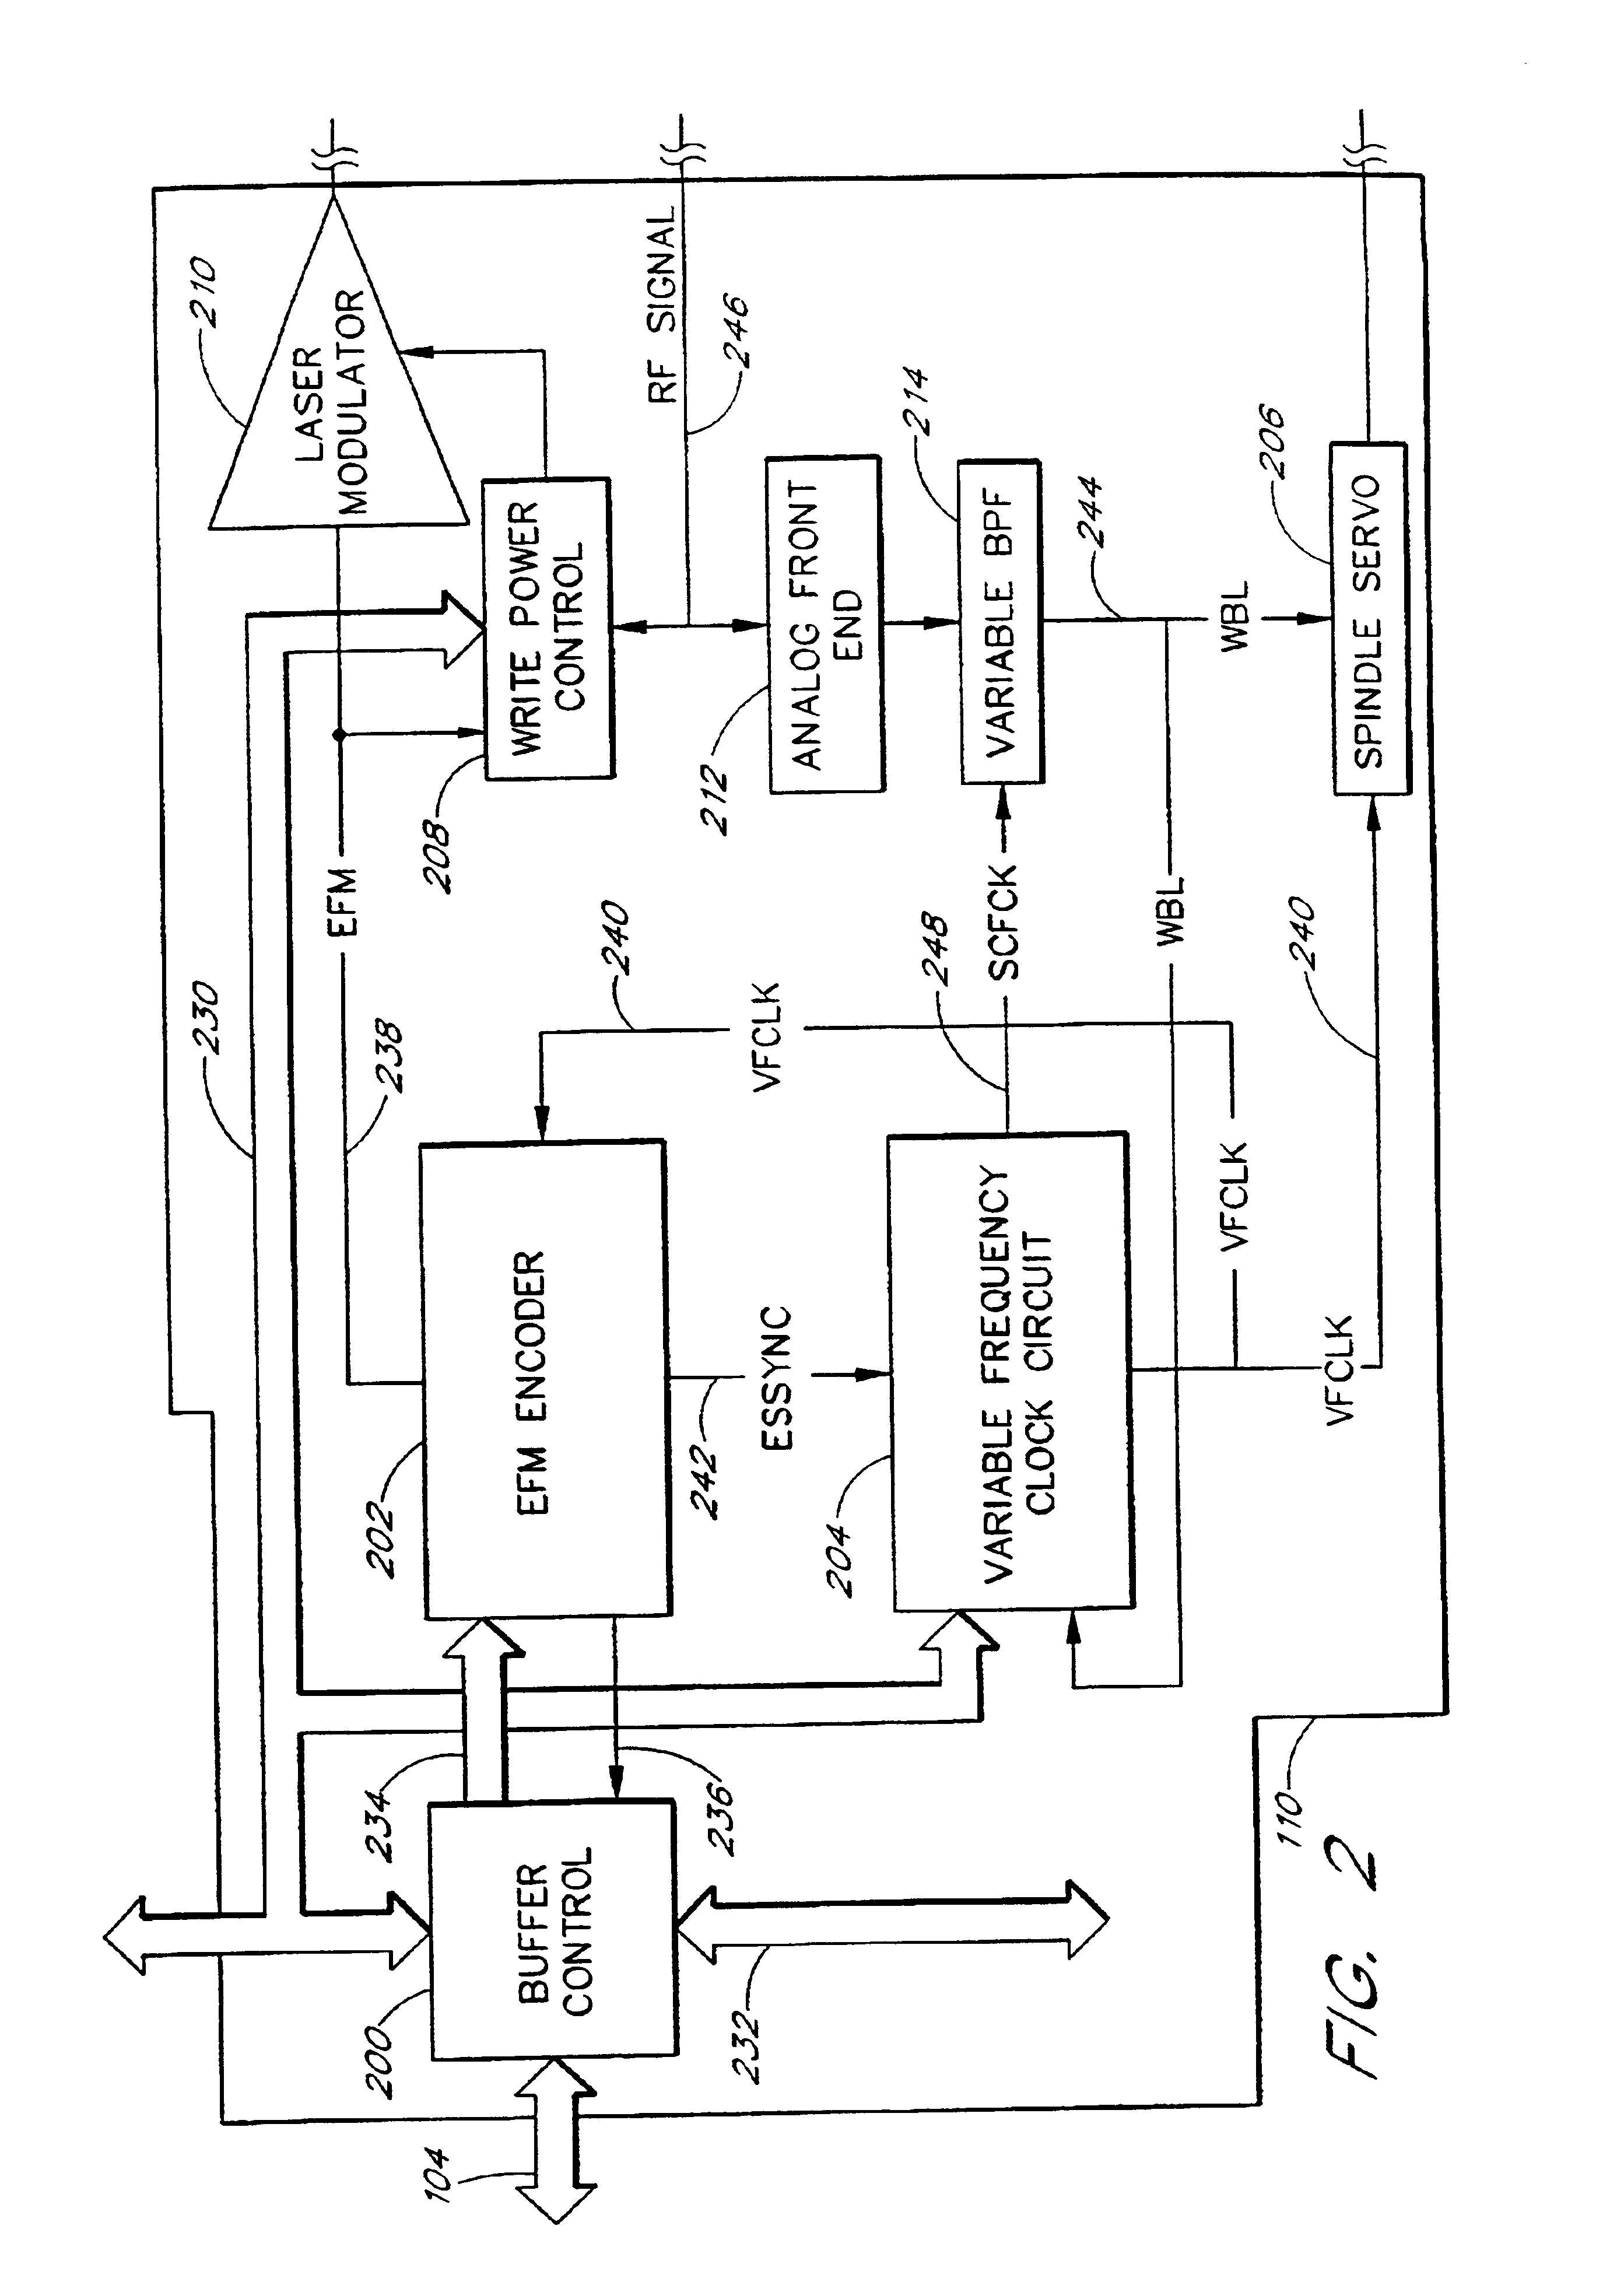 Writable optical drive with dynamically variable linear velocity to prevent buffer under-run